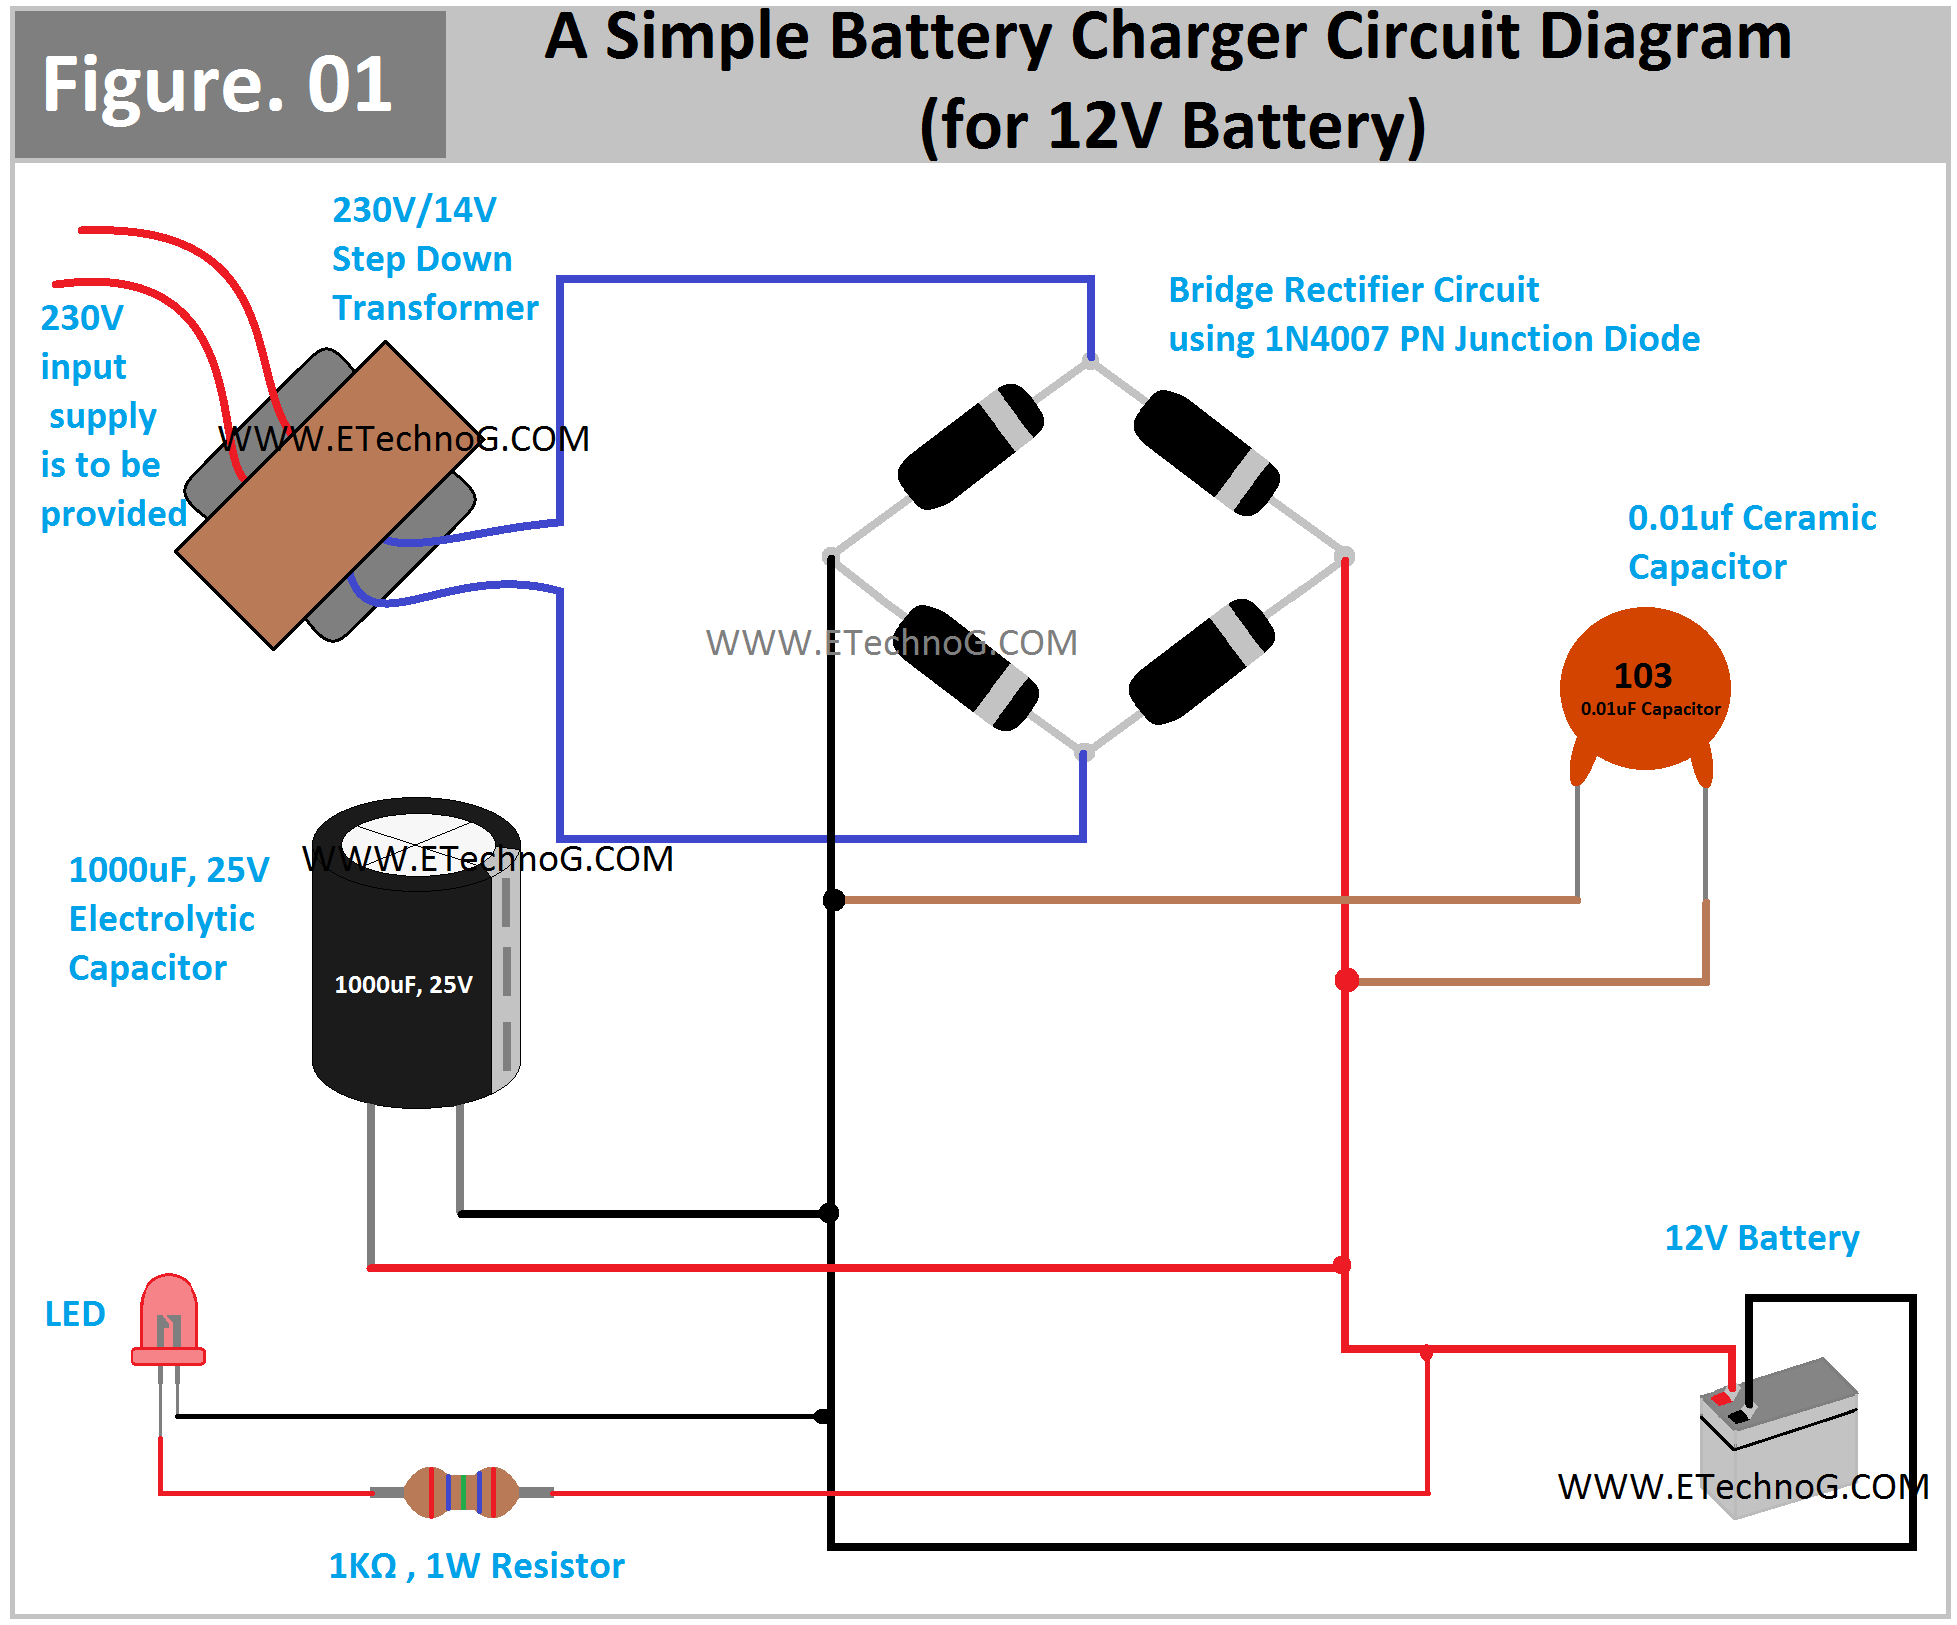 Battery Charger Circuit Diagram for 12V Battery